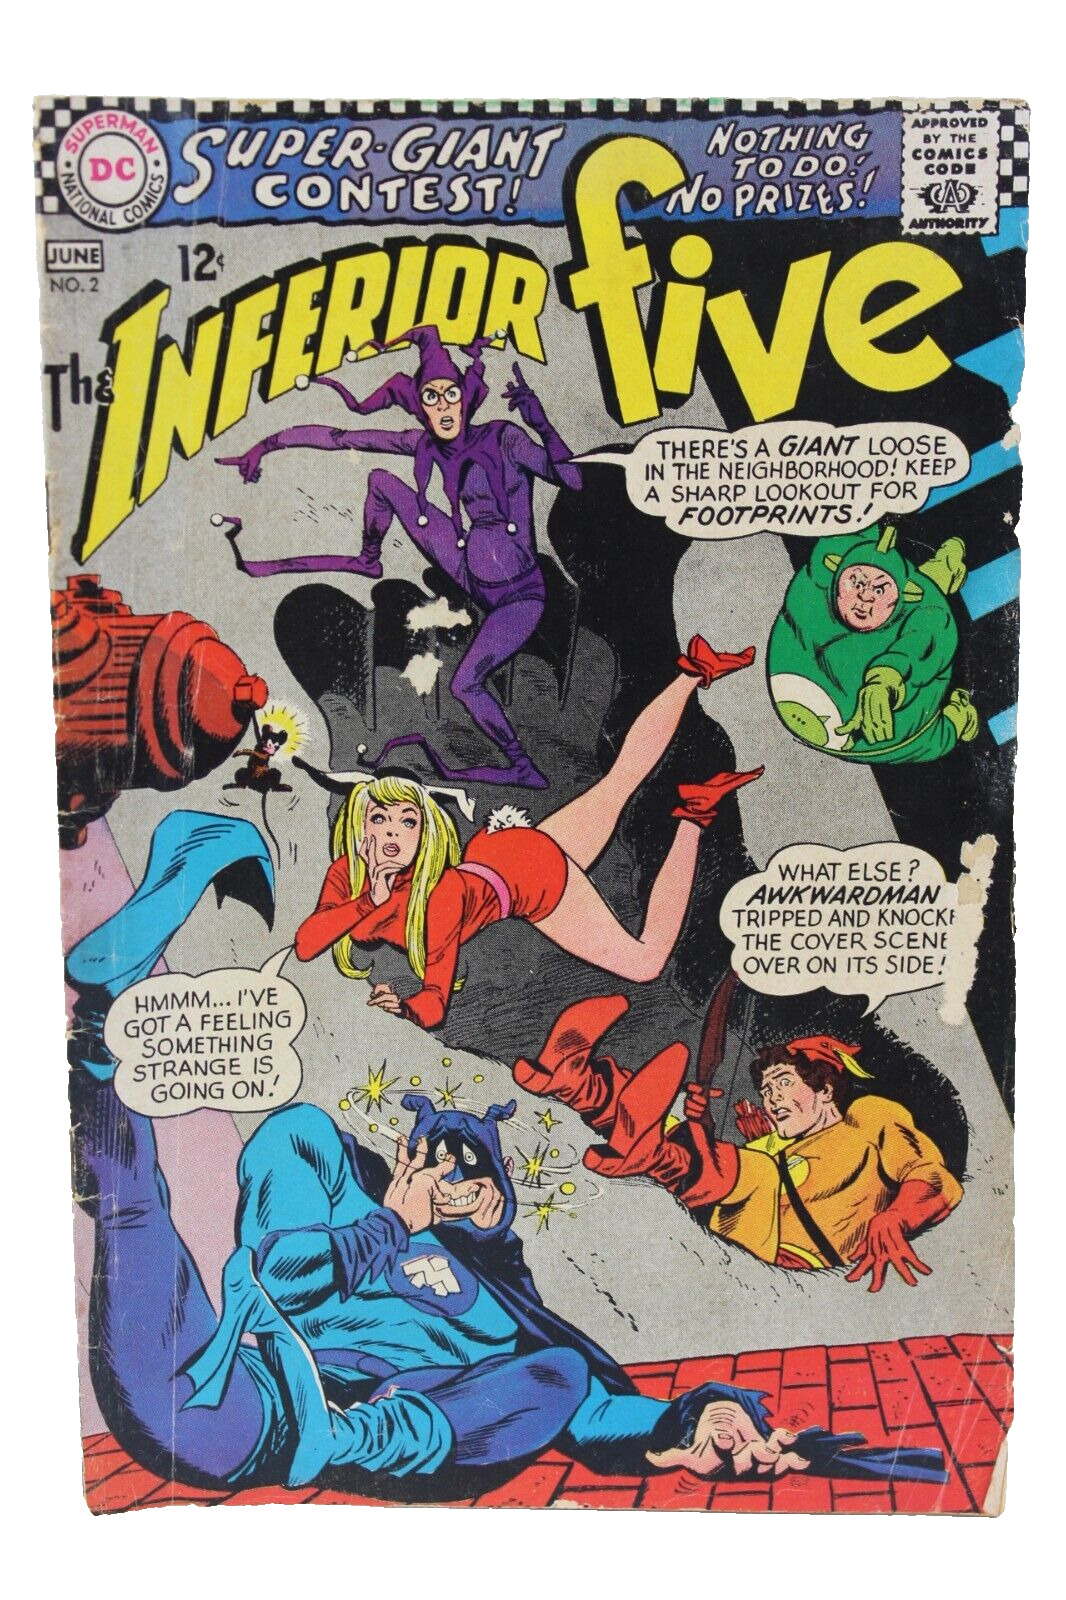 The Inferior Five #2 House-Hunting Heroes 1967 DC Comics PR/FR